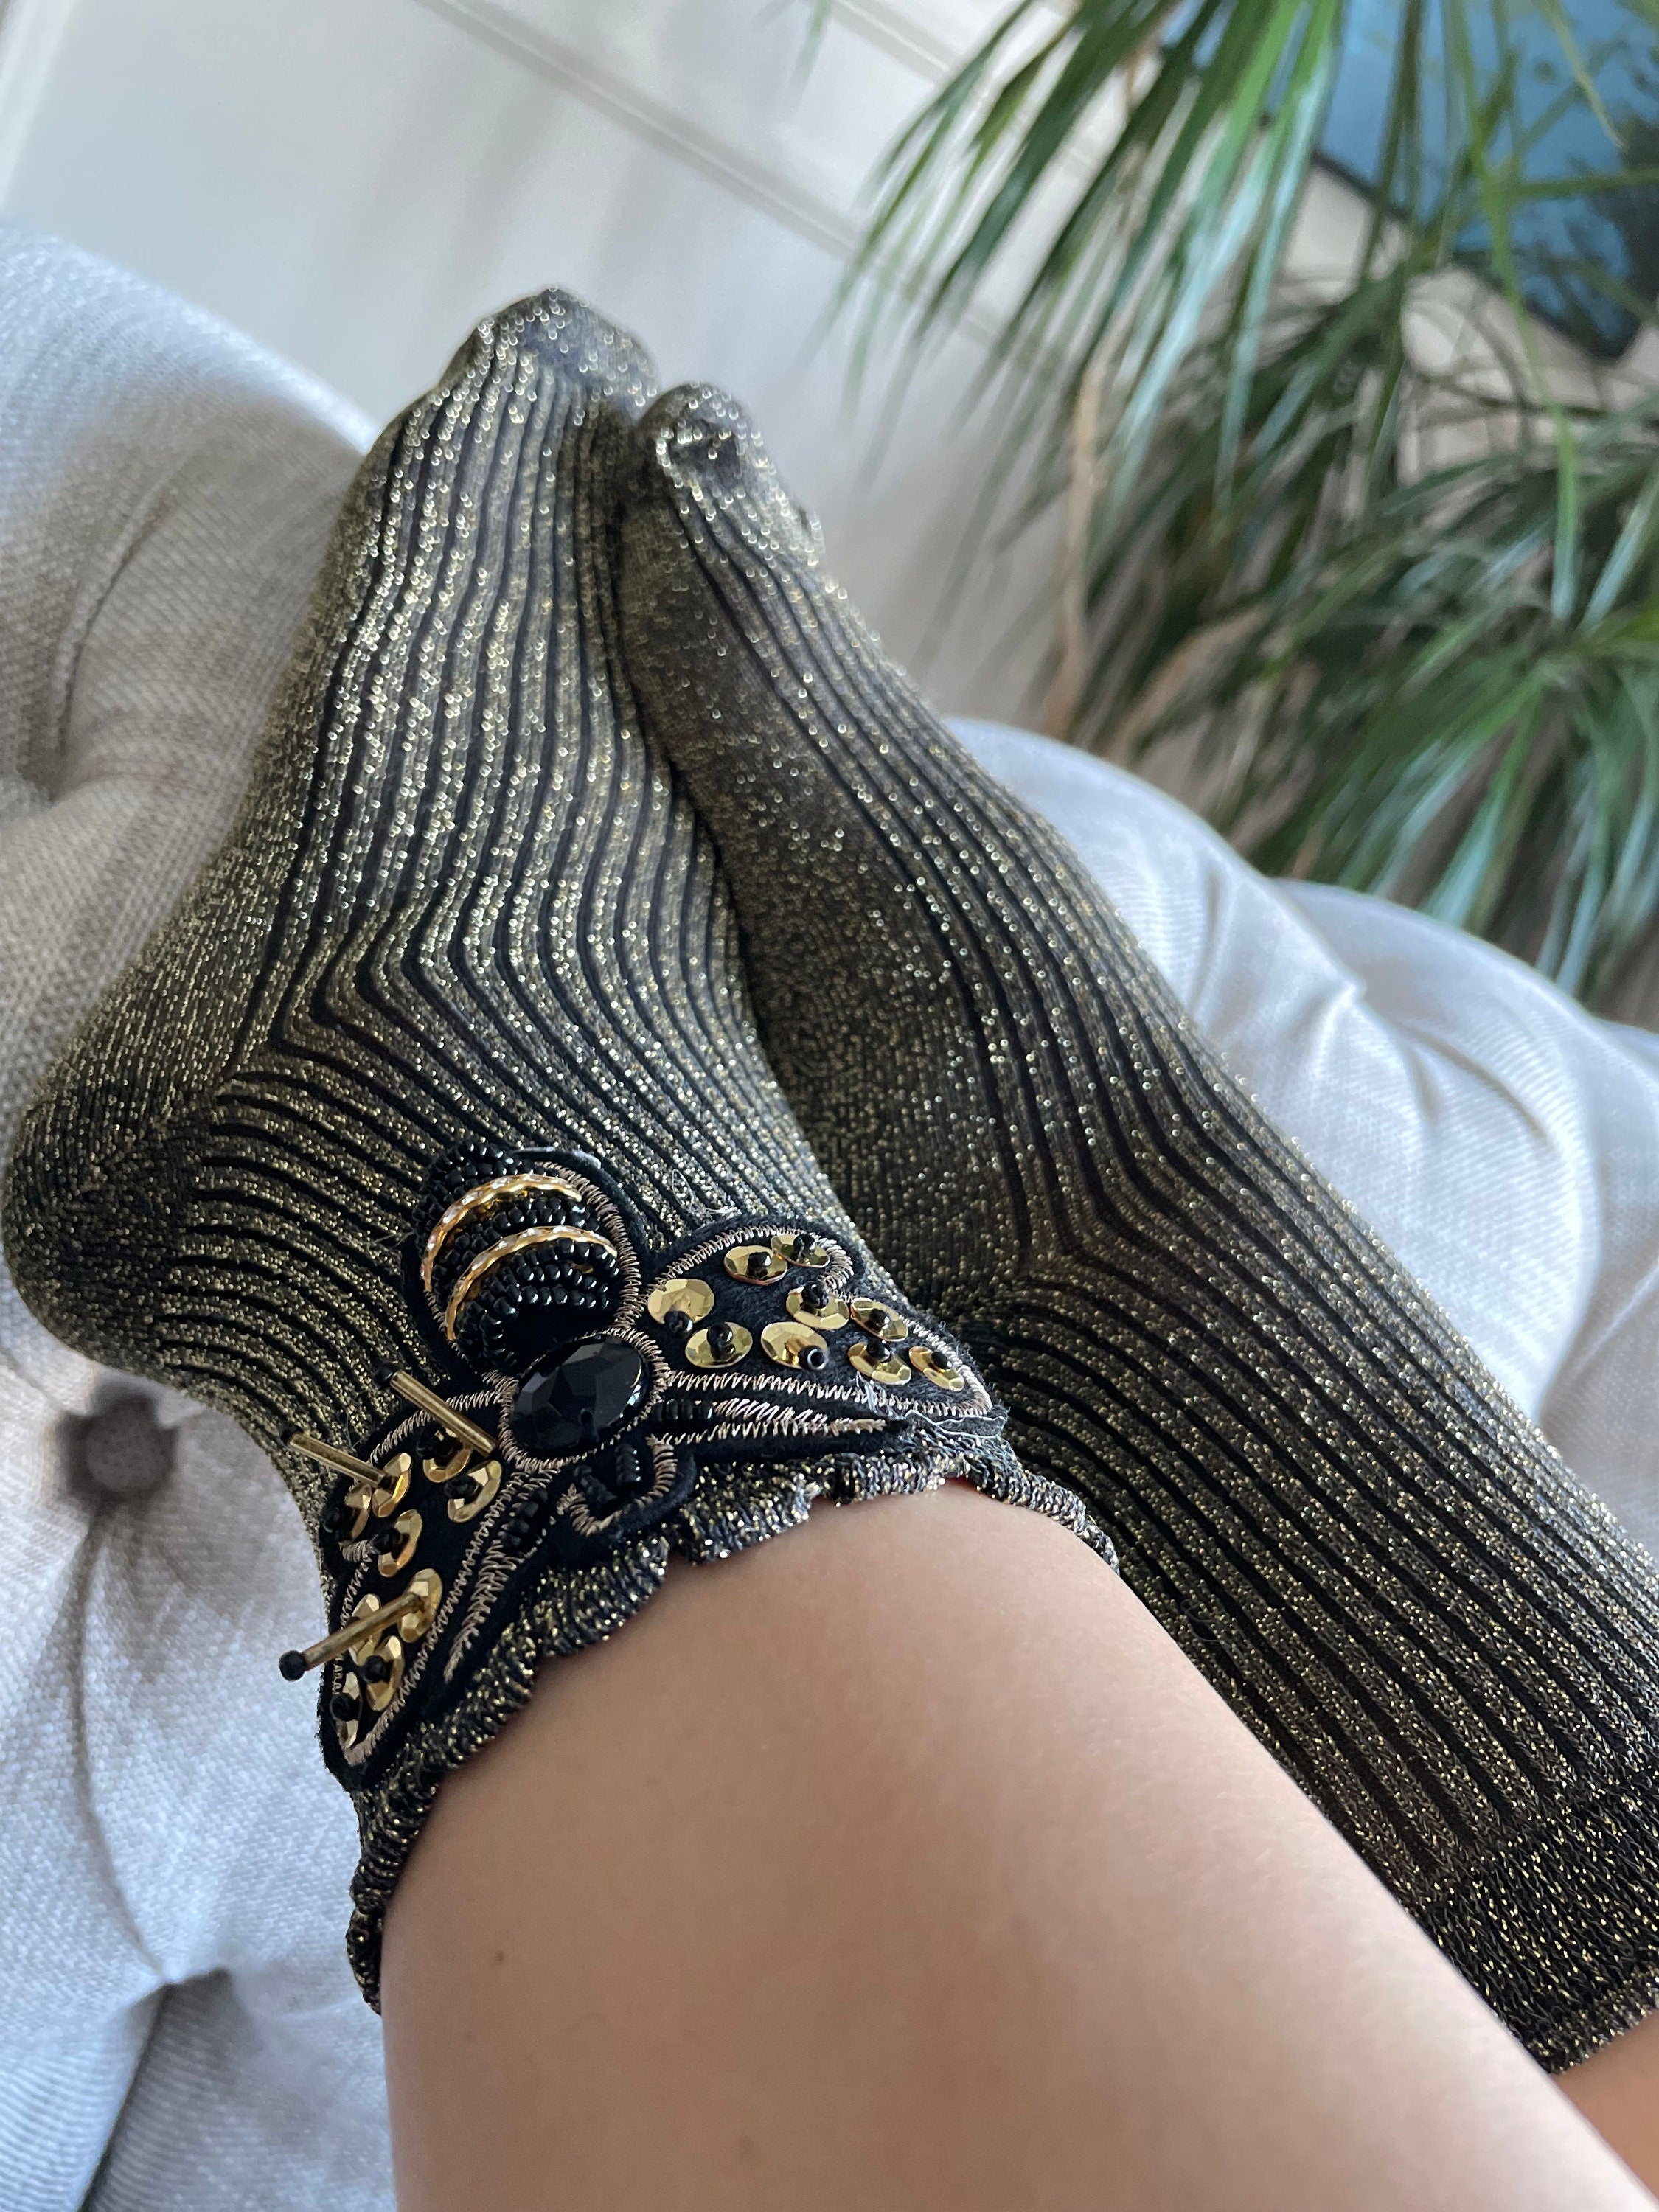 Stay comfortable and stylish with these Trendy Mesh Socks, featuring a bee design with cute novelty stones